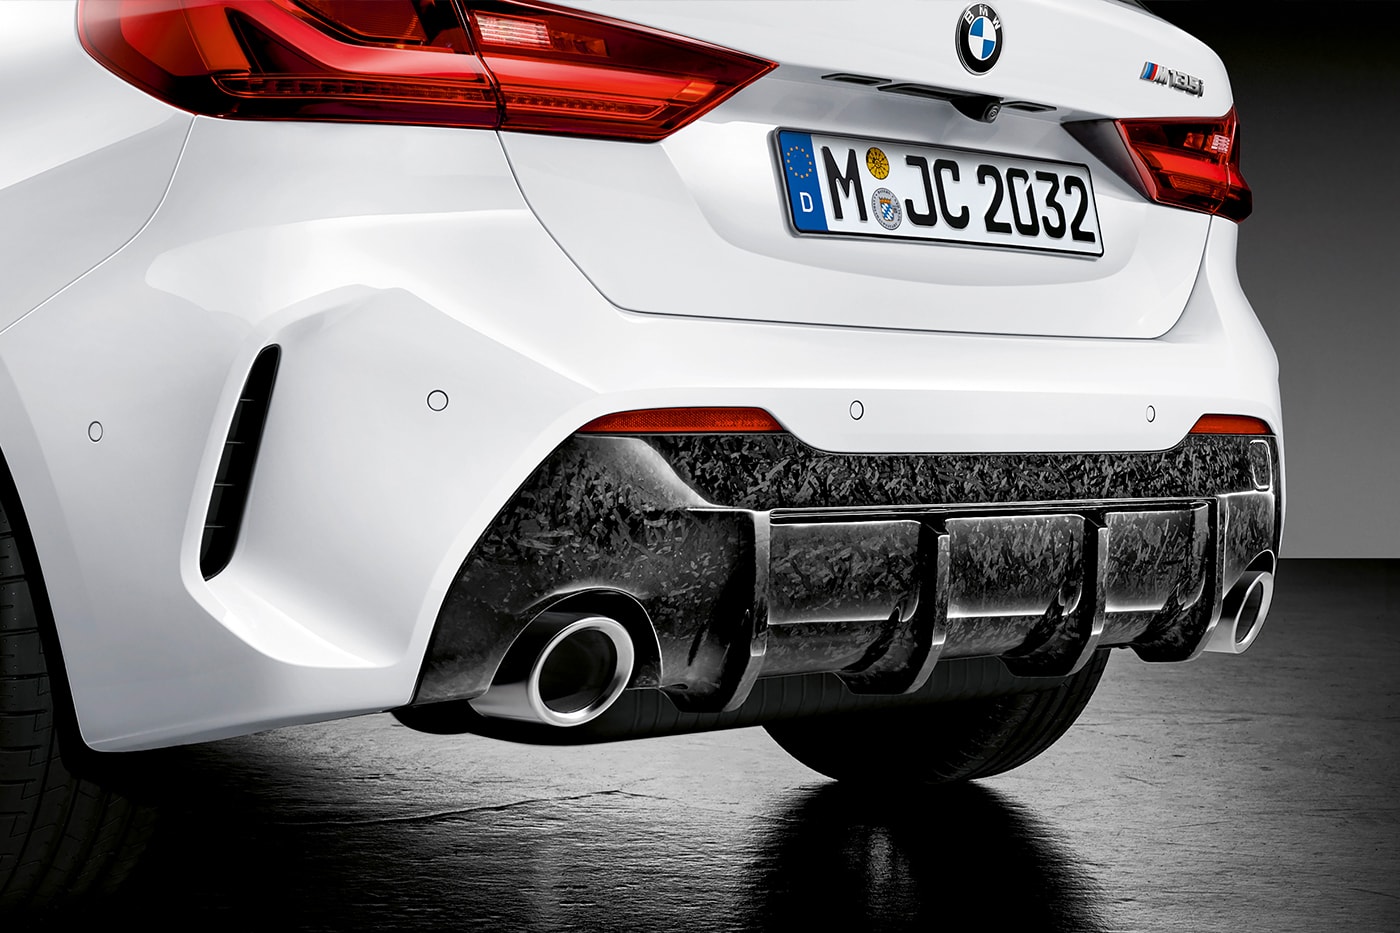 2019 BMW 1 Series M Performance Options parts automotive sports cars racing aerodynamic and exterior components Frozen Black lettering diffuser carbon fibre kidney grille exhaust front splitter spoiler aero flicks BMW M GmbH 